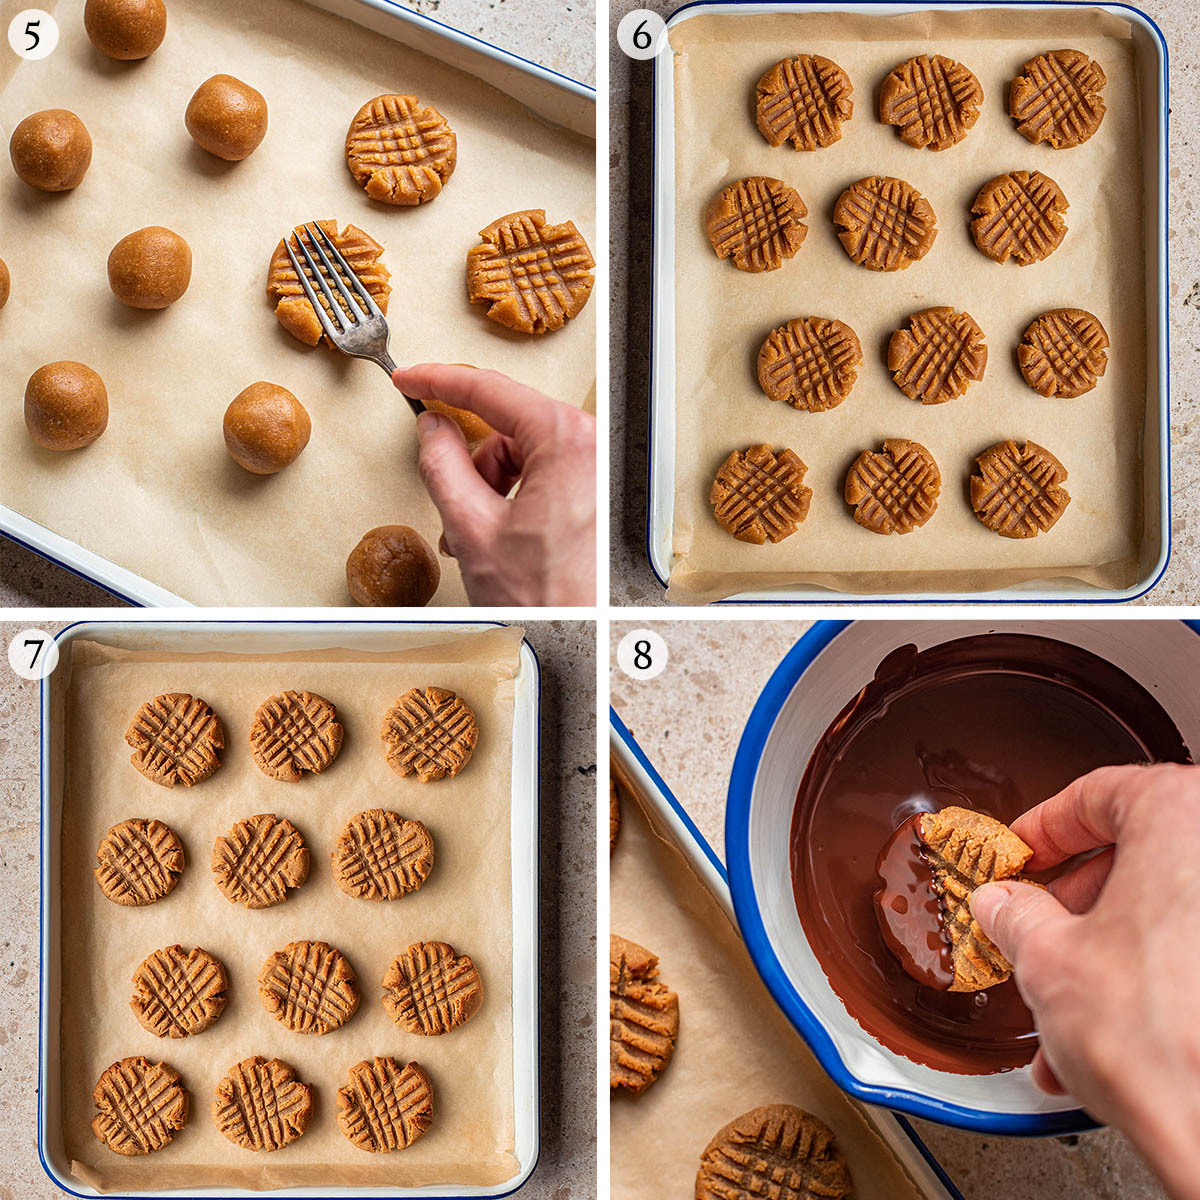 Gluten free peanut butter cookies steps 5 to 8.